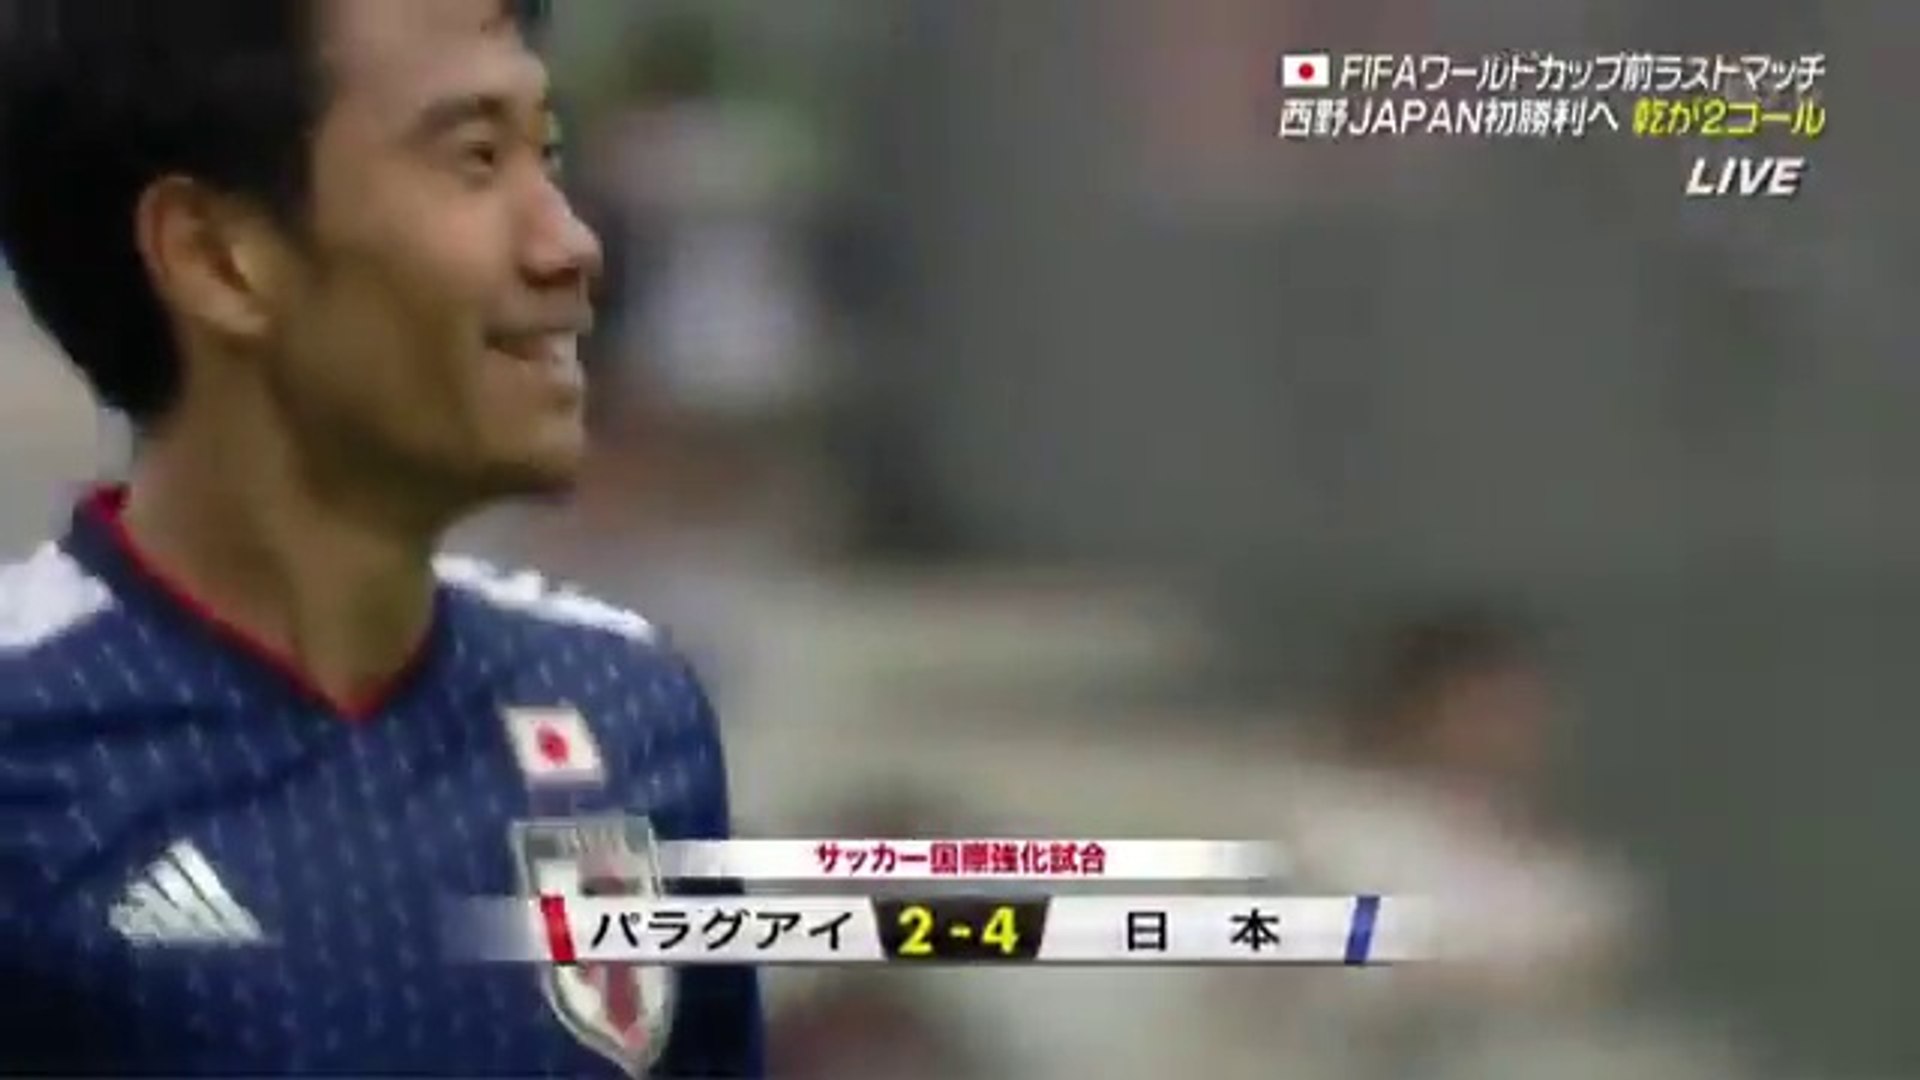 Japan 4 2 Paraguay Highlights 12 06 18 Video Dailymotion